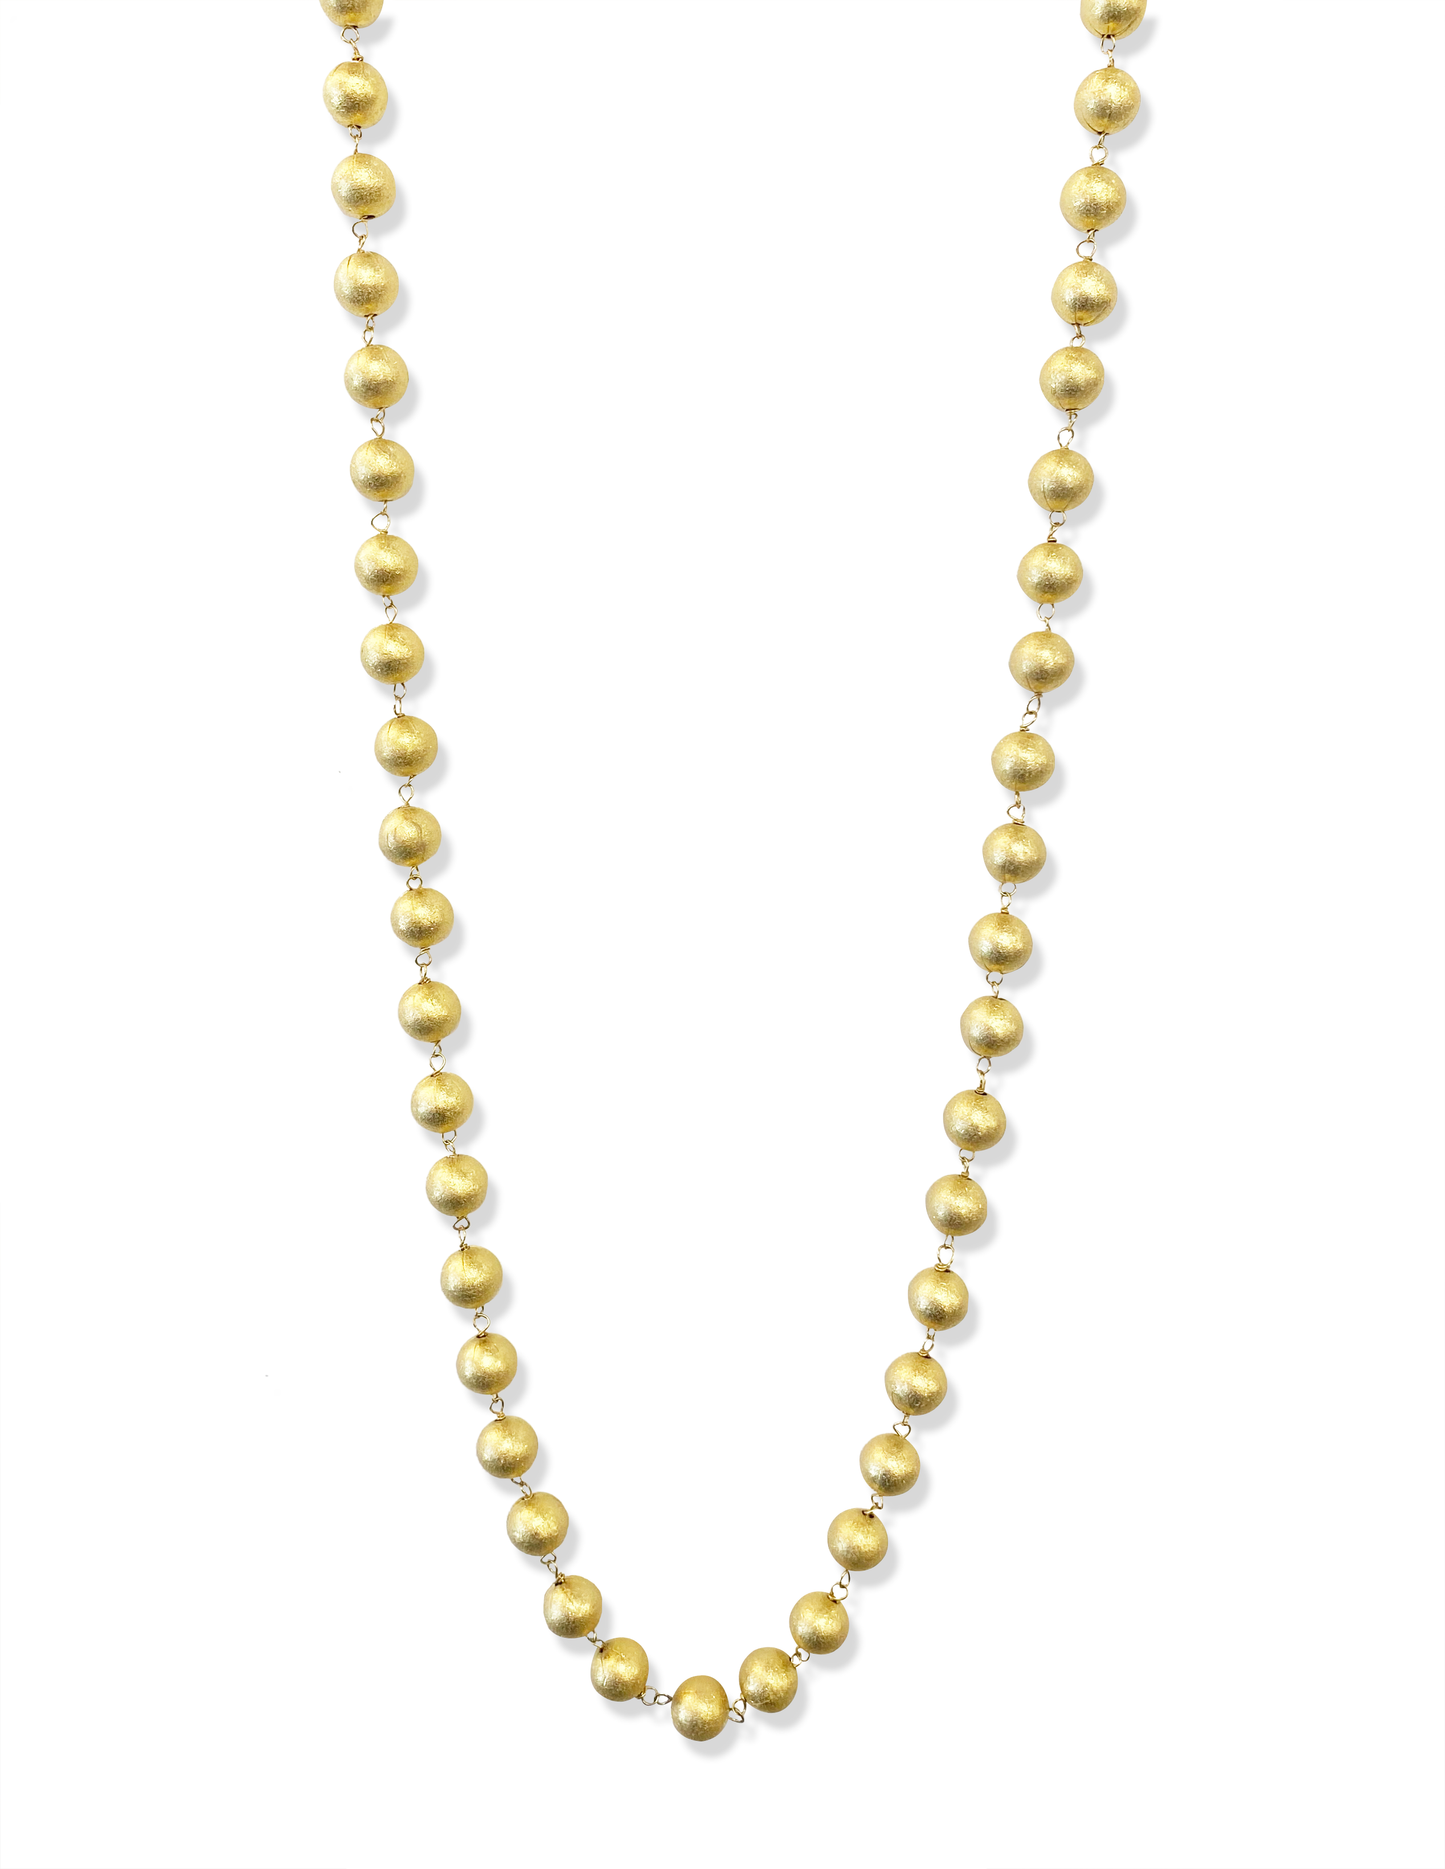 Necklace Gold Beads 32"